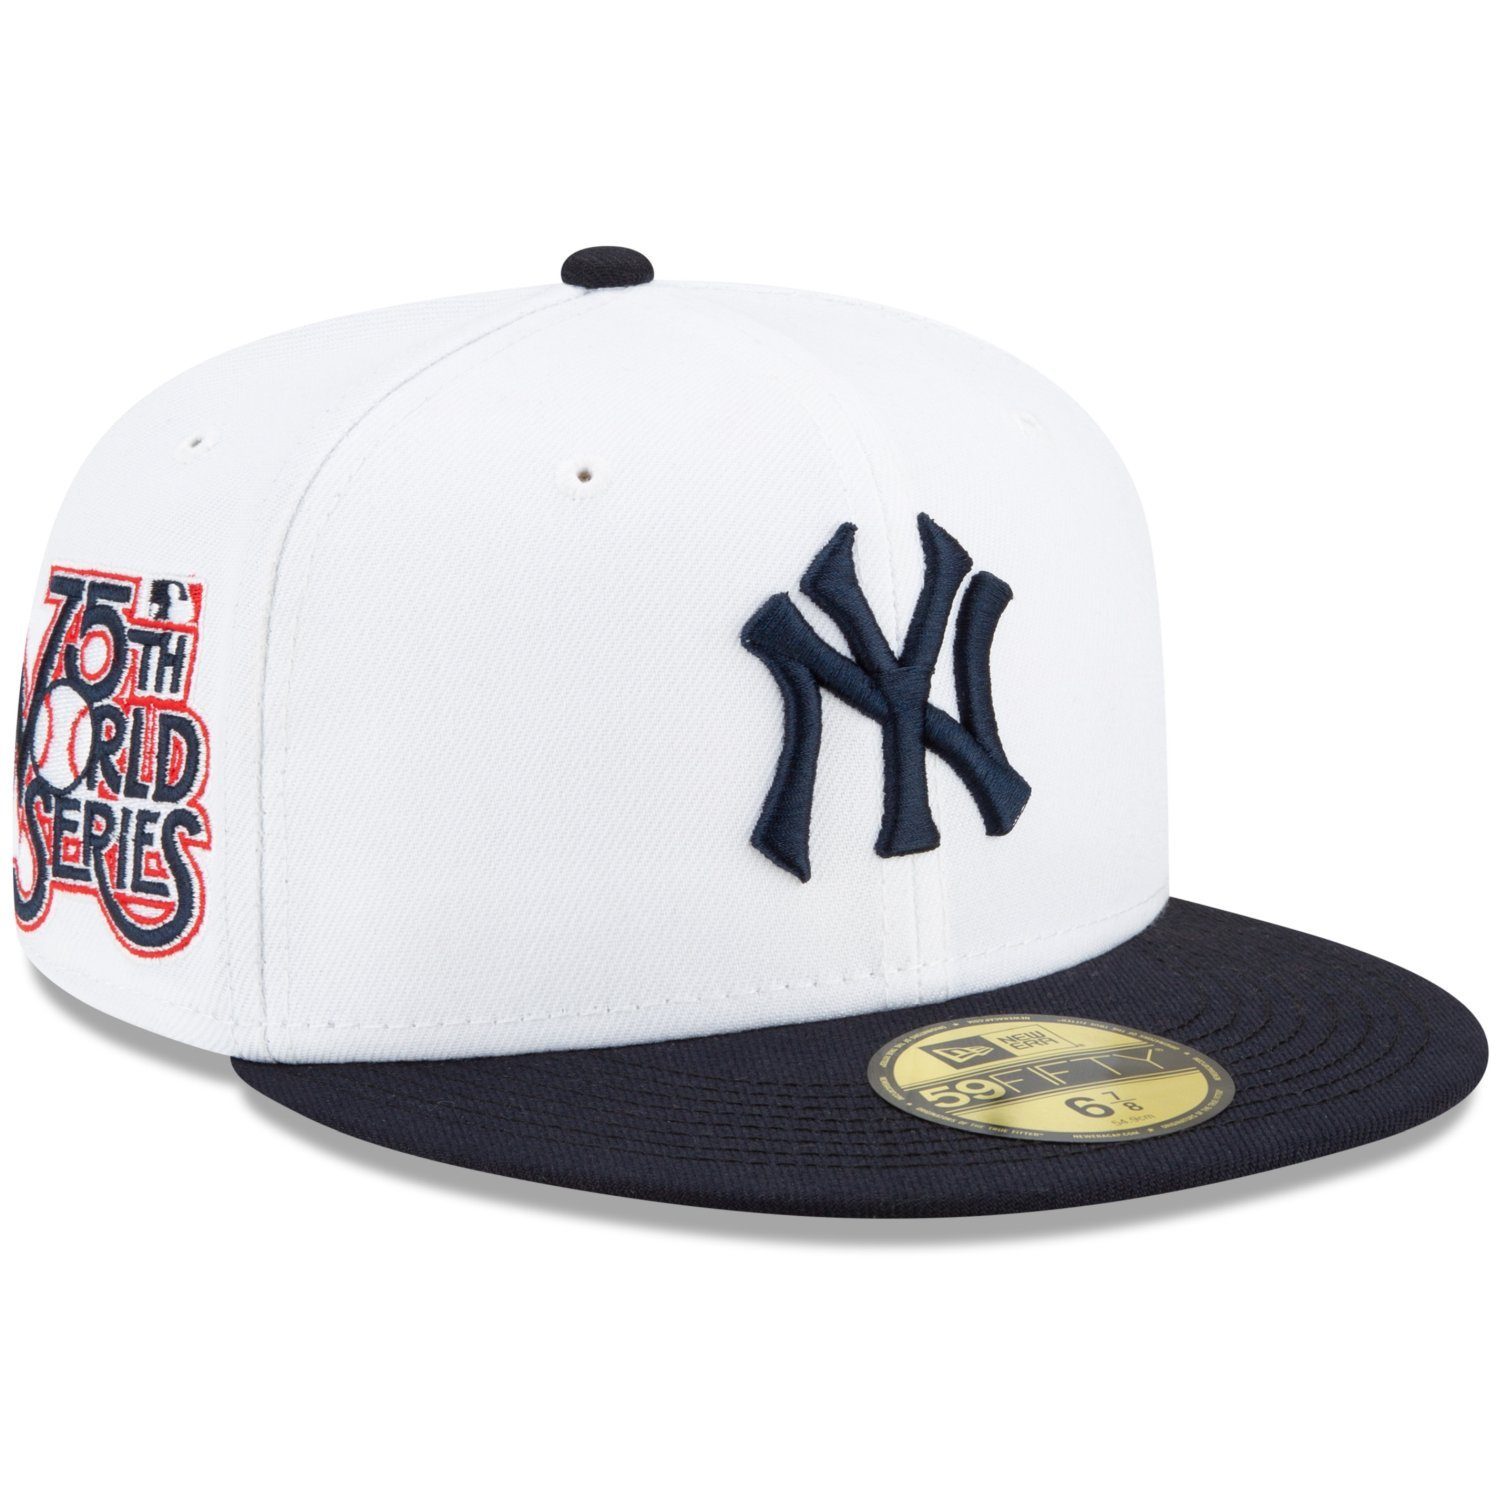 New Era Fitted Cap 59Fifty WORLD SERIES 1975 NY Yankees